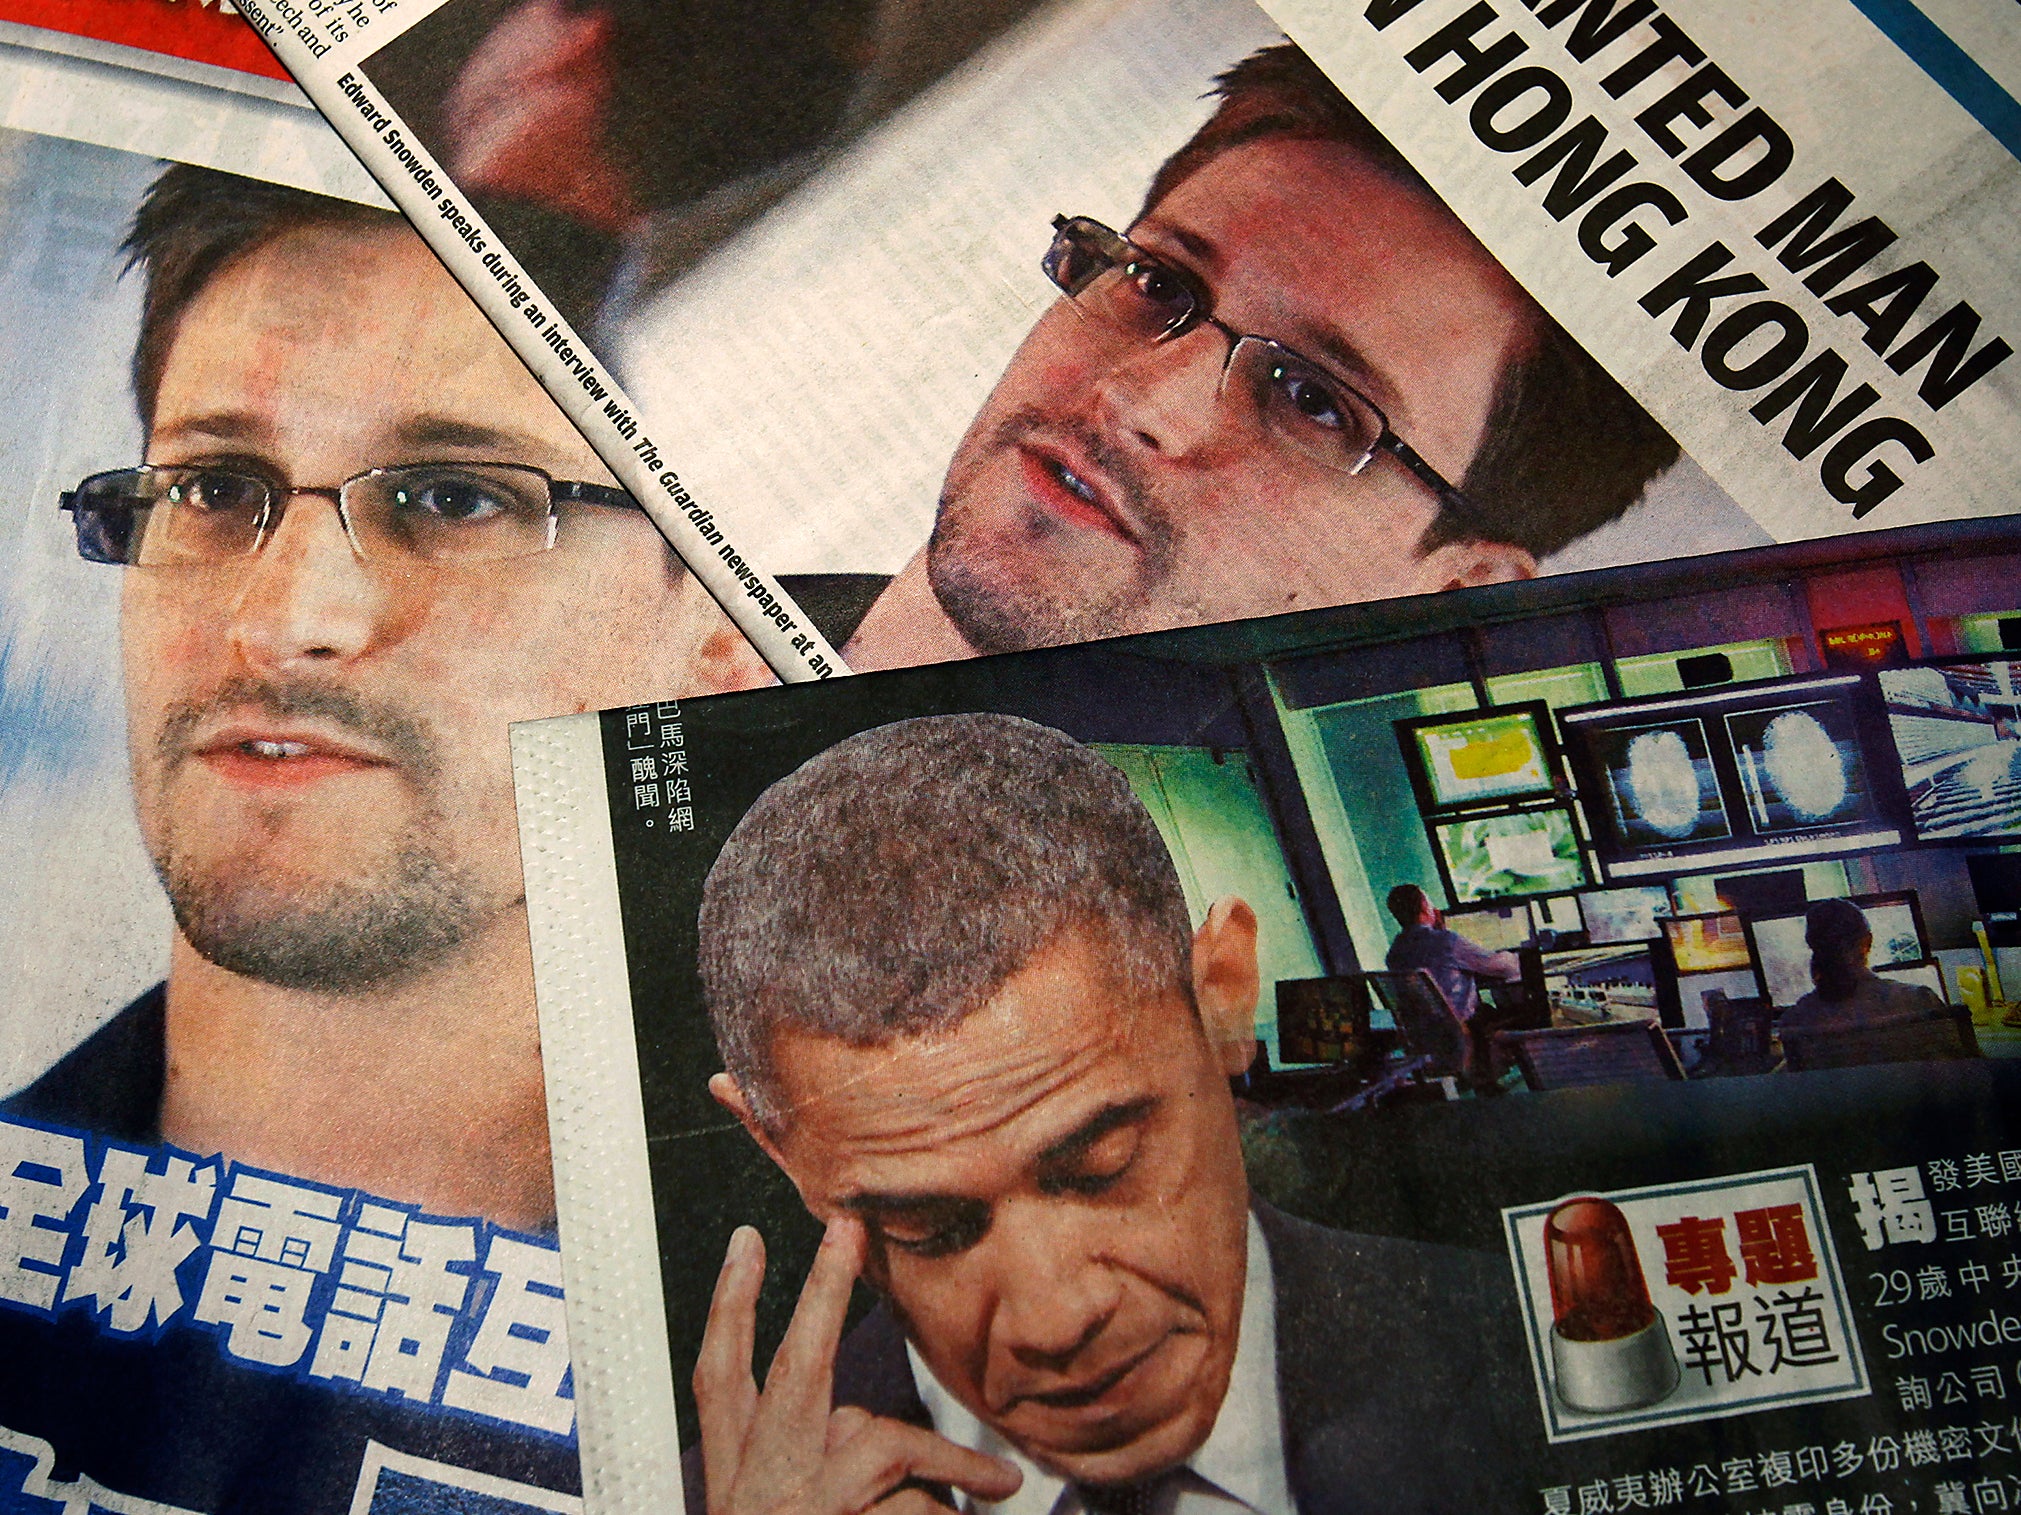 A pardon for Edward Snowden does not appear to be forthcoming from President Obama